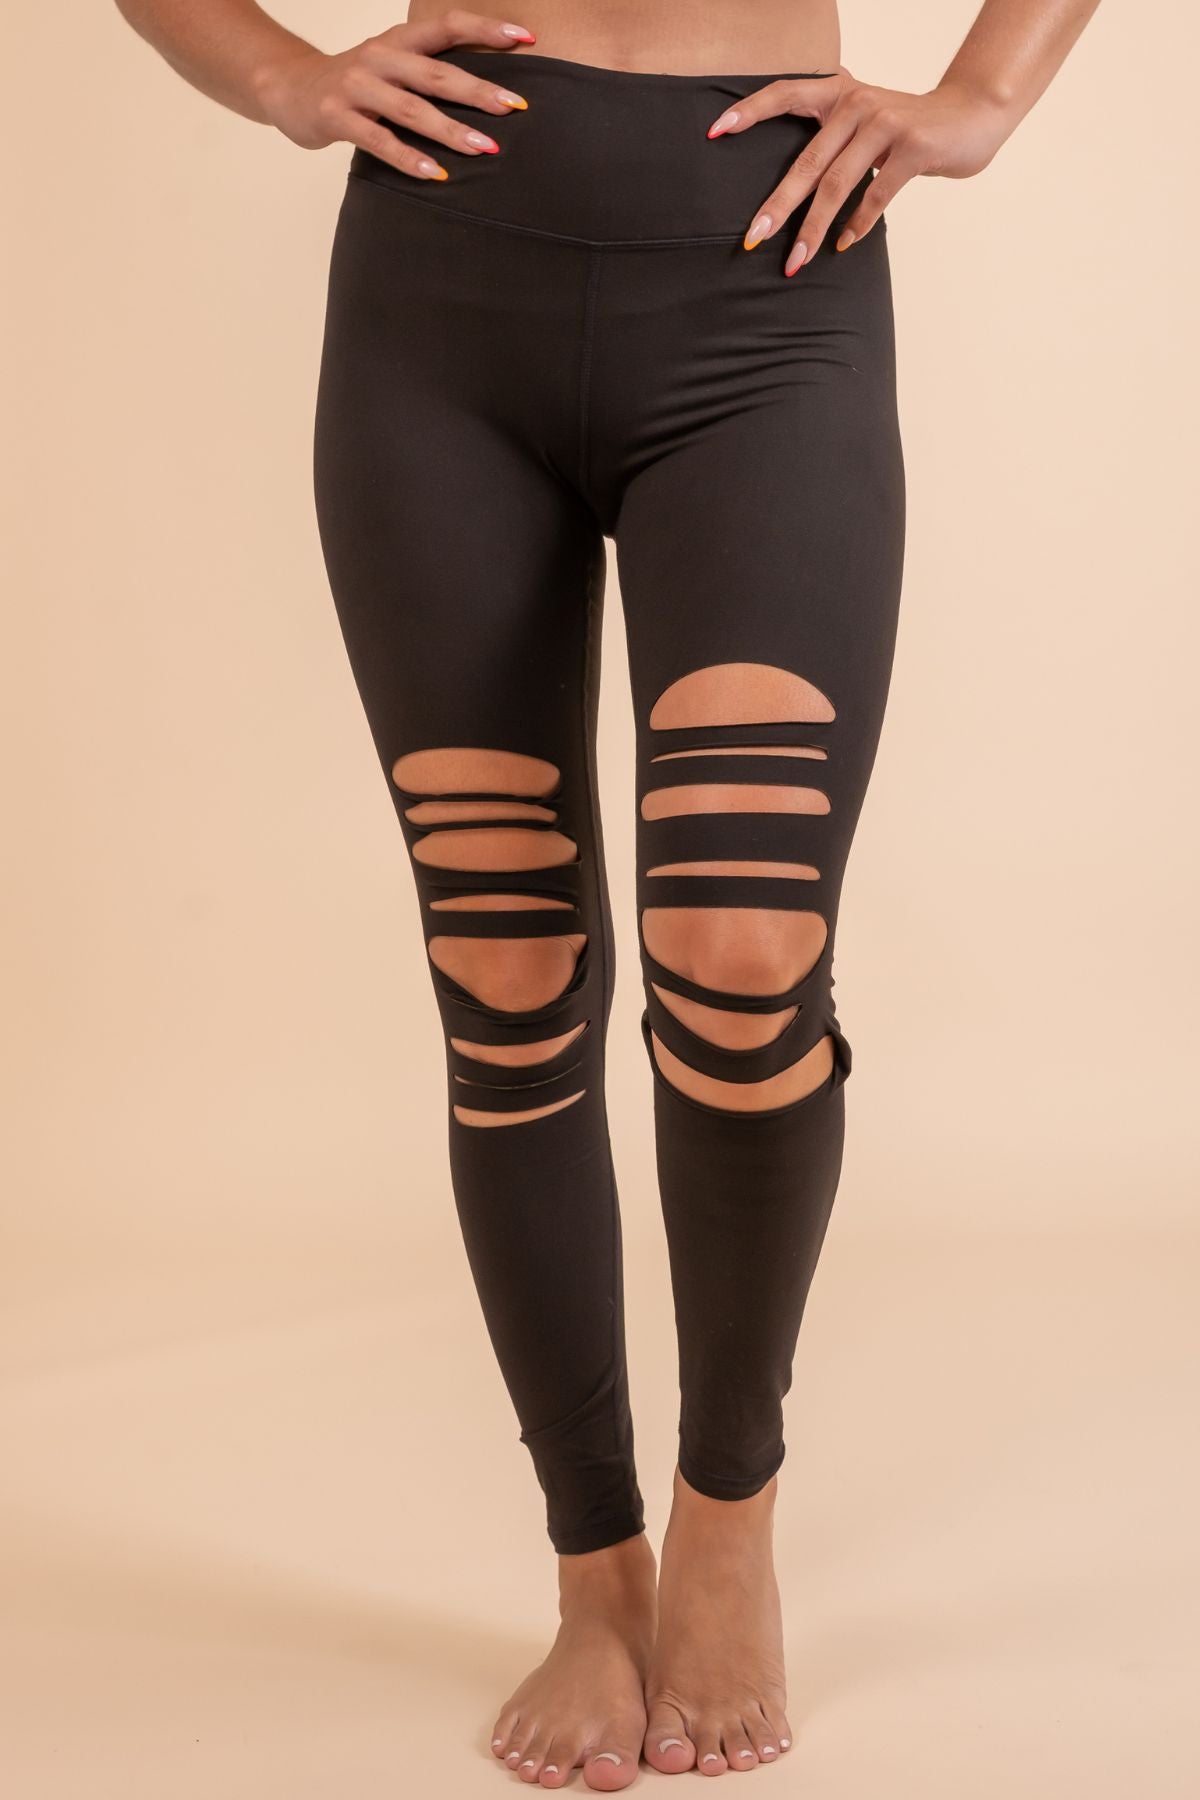 Punk Rock Style Skinny Pants For Women Slim Cut Out, Fantasy Ripped Leggings  With Holes In Black And White Colors M XXL From Bestielady, $4.89 |  DHgate.Com